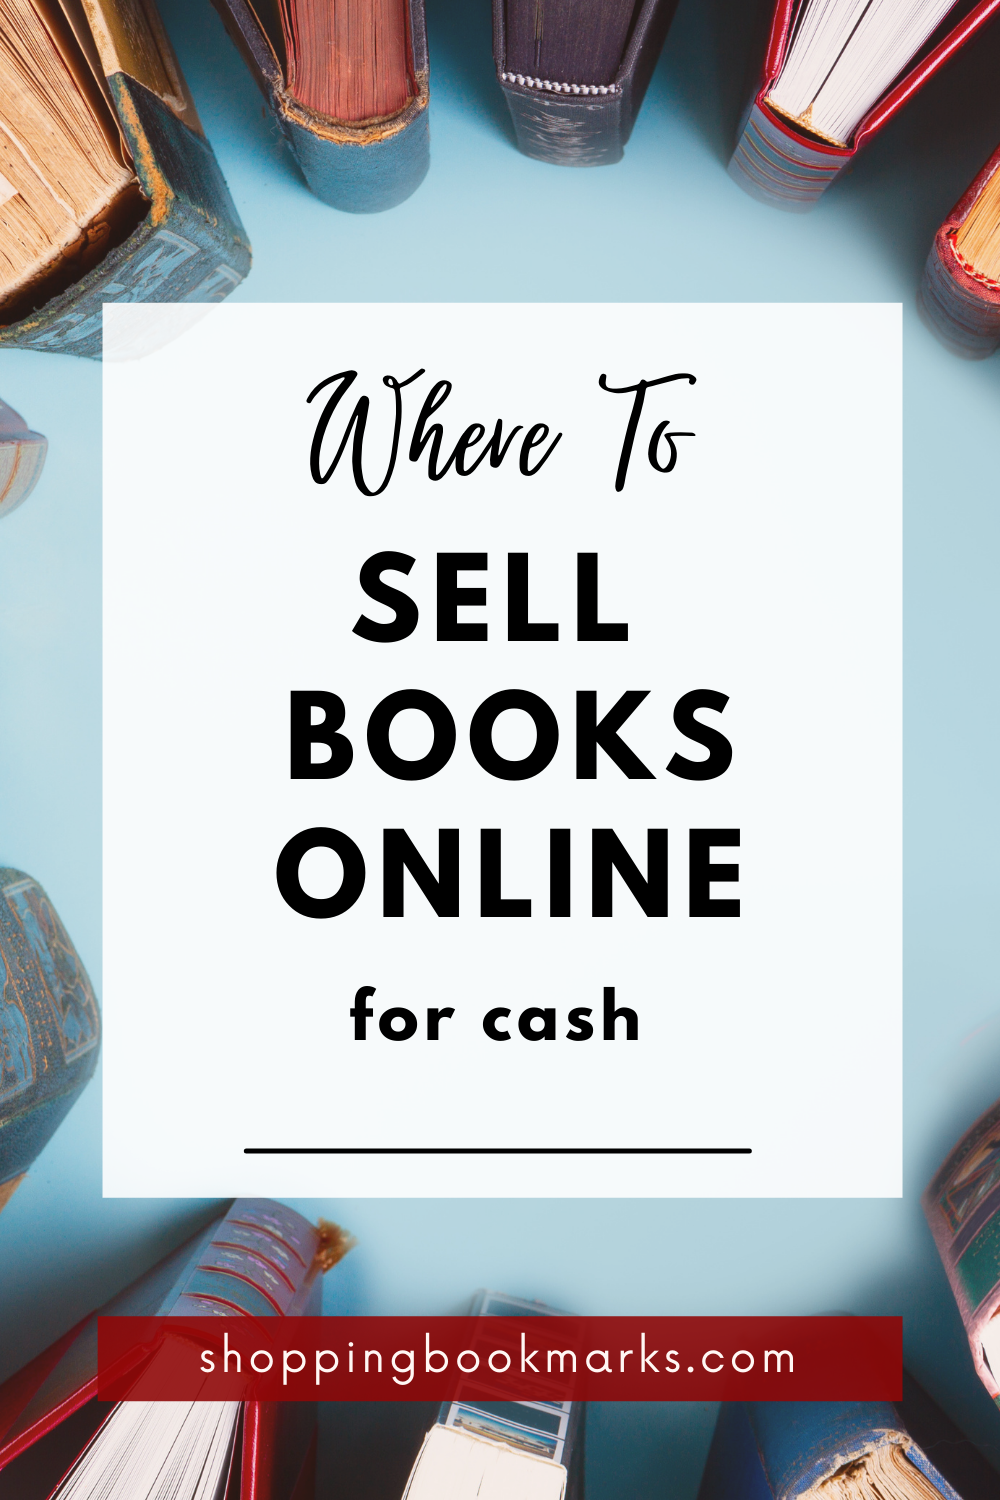 Where To Sell Books Online For Cash